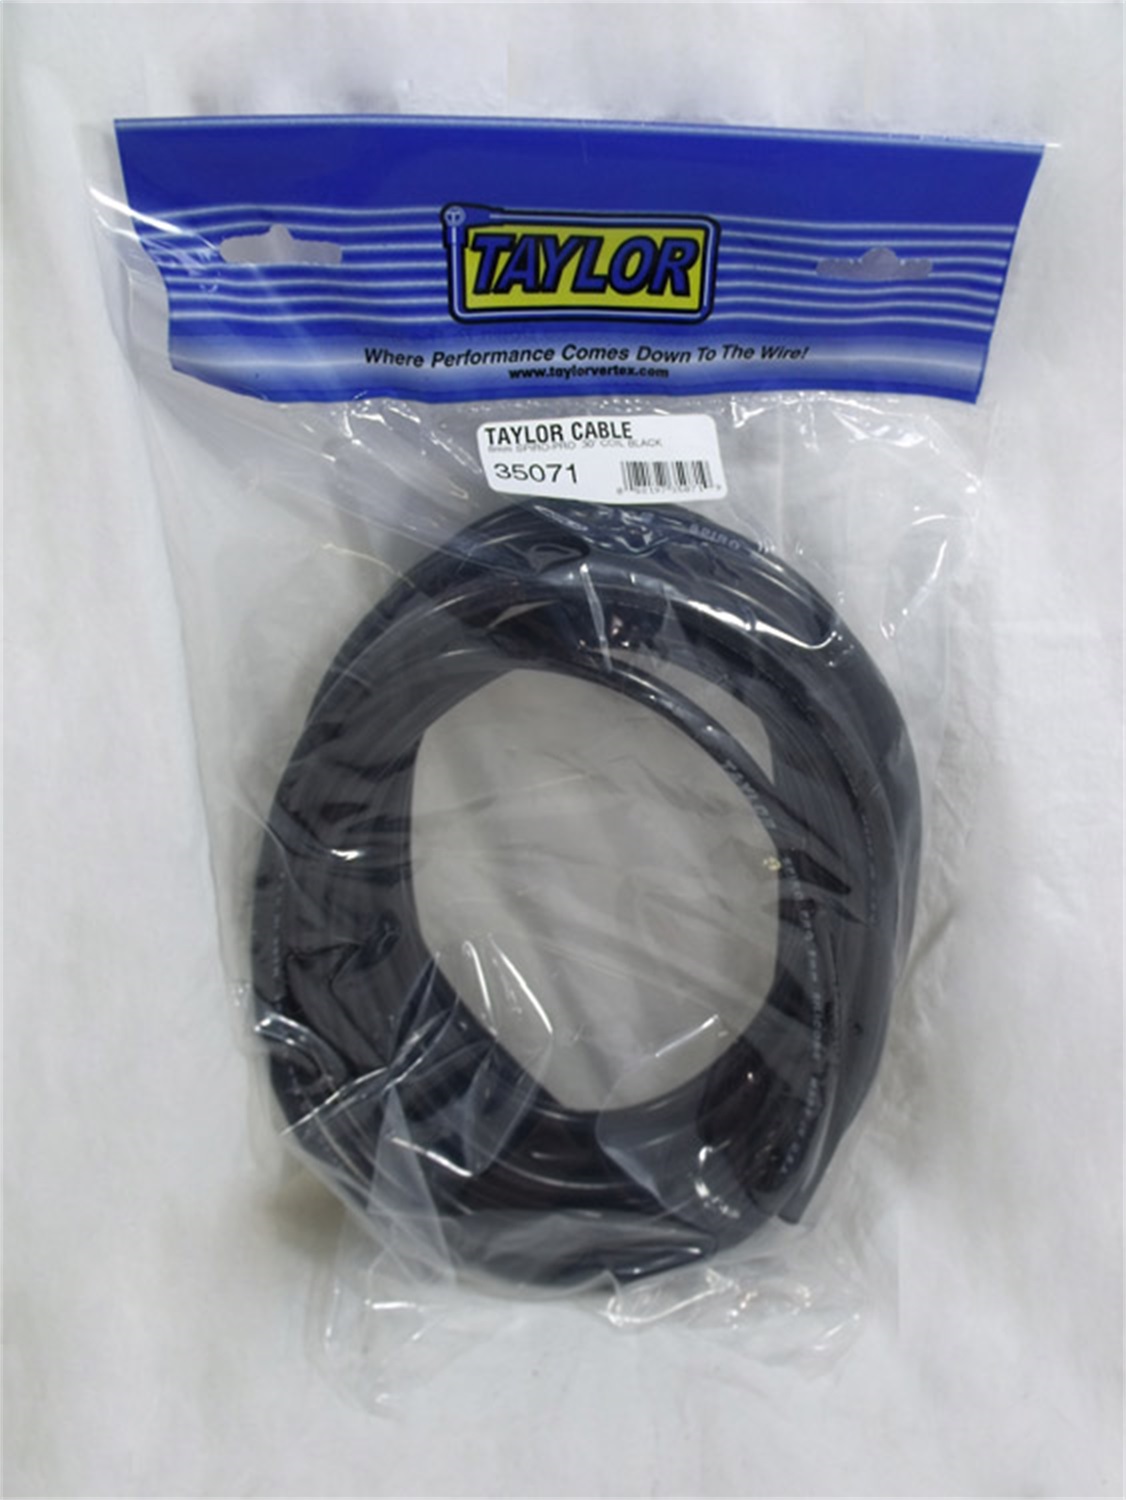 Taylor Cable Taylor Cable 35071 8mm Spiro Wound; Ignition Wire